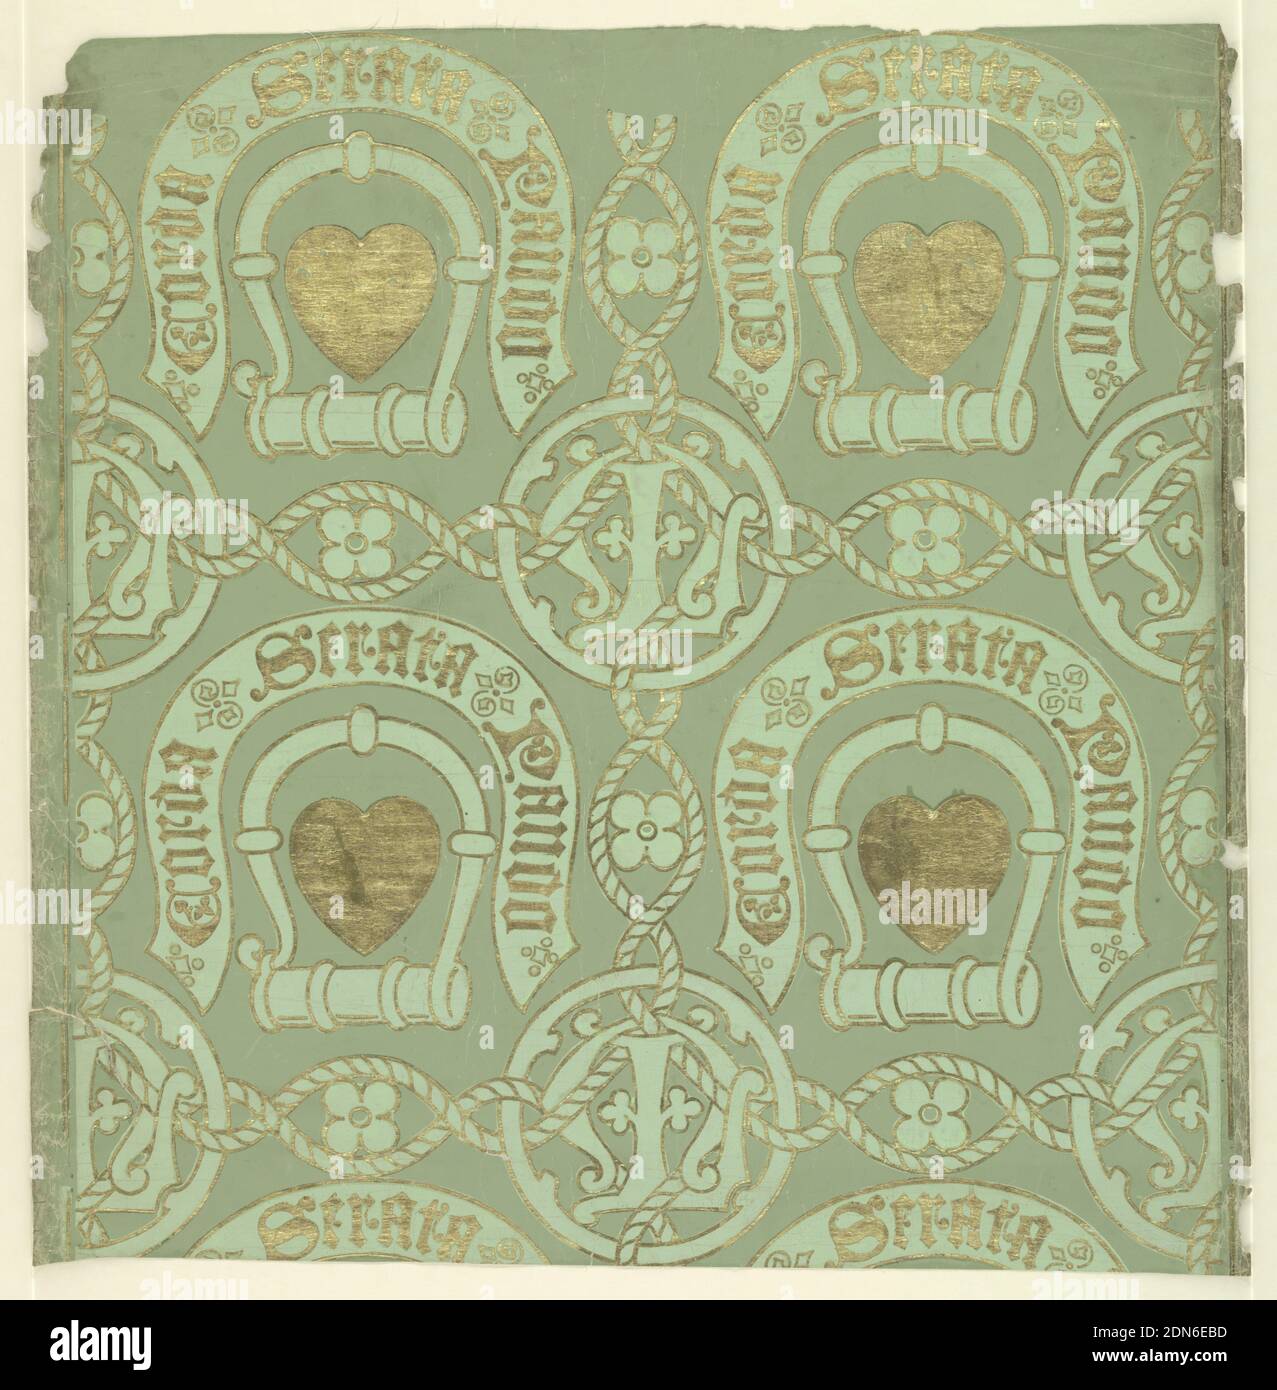 Sidewall, William Woolams and Co., A.W.N. Pugin, English, 1812–1852, Block-printed paper, Major motif a gold heart enframed by a fetterlock with accompanying motto: Corda Serata Pando. In staggered relationship to this, a circular medallion contains the letter 'M' superimposed on the letter 'L'. Twisted rope embellishments connect monograms. Printed for Lady Macdonald Lockhart for use at Lee Castle, Lanarkshire. On verso is stamped almost illegibly: 'John G. Crace / 14 Wigmore Street.', England, ca. 1848, Wallcoverings, Sidewall Stock Photo